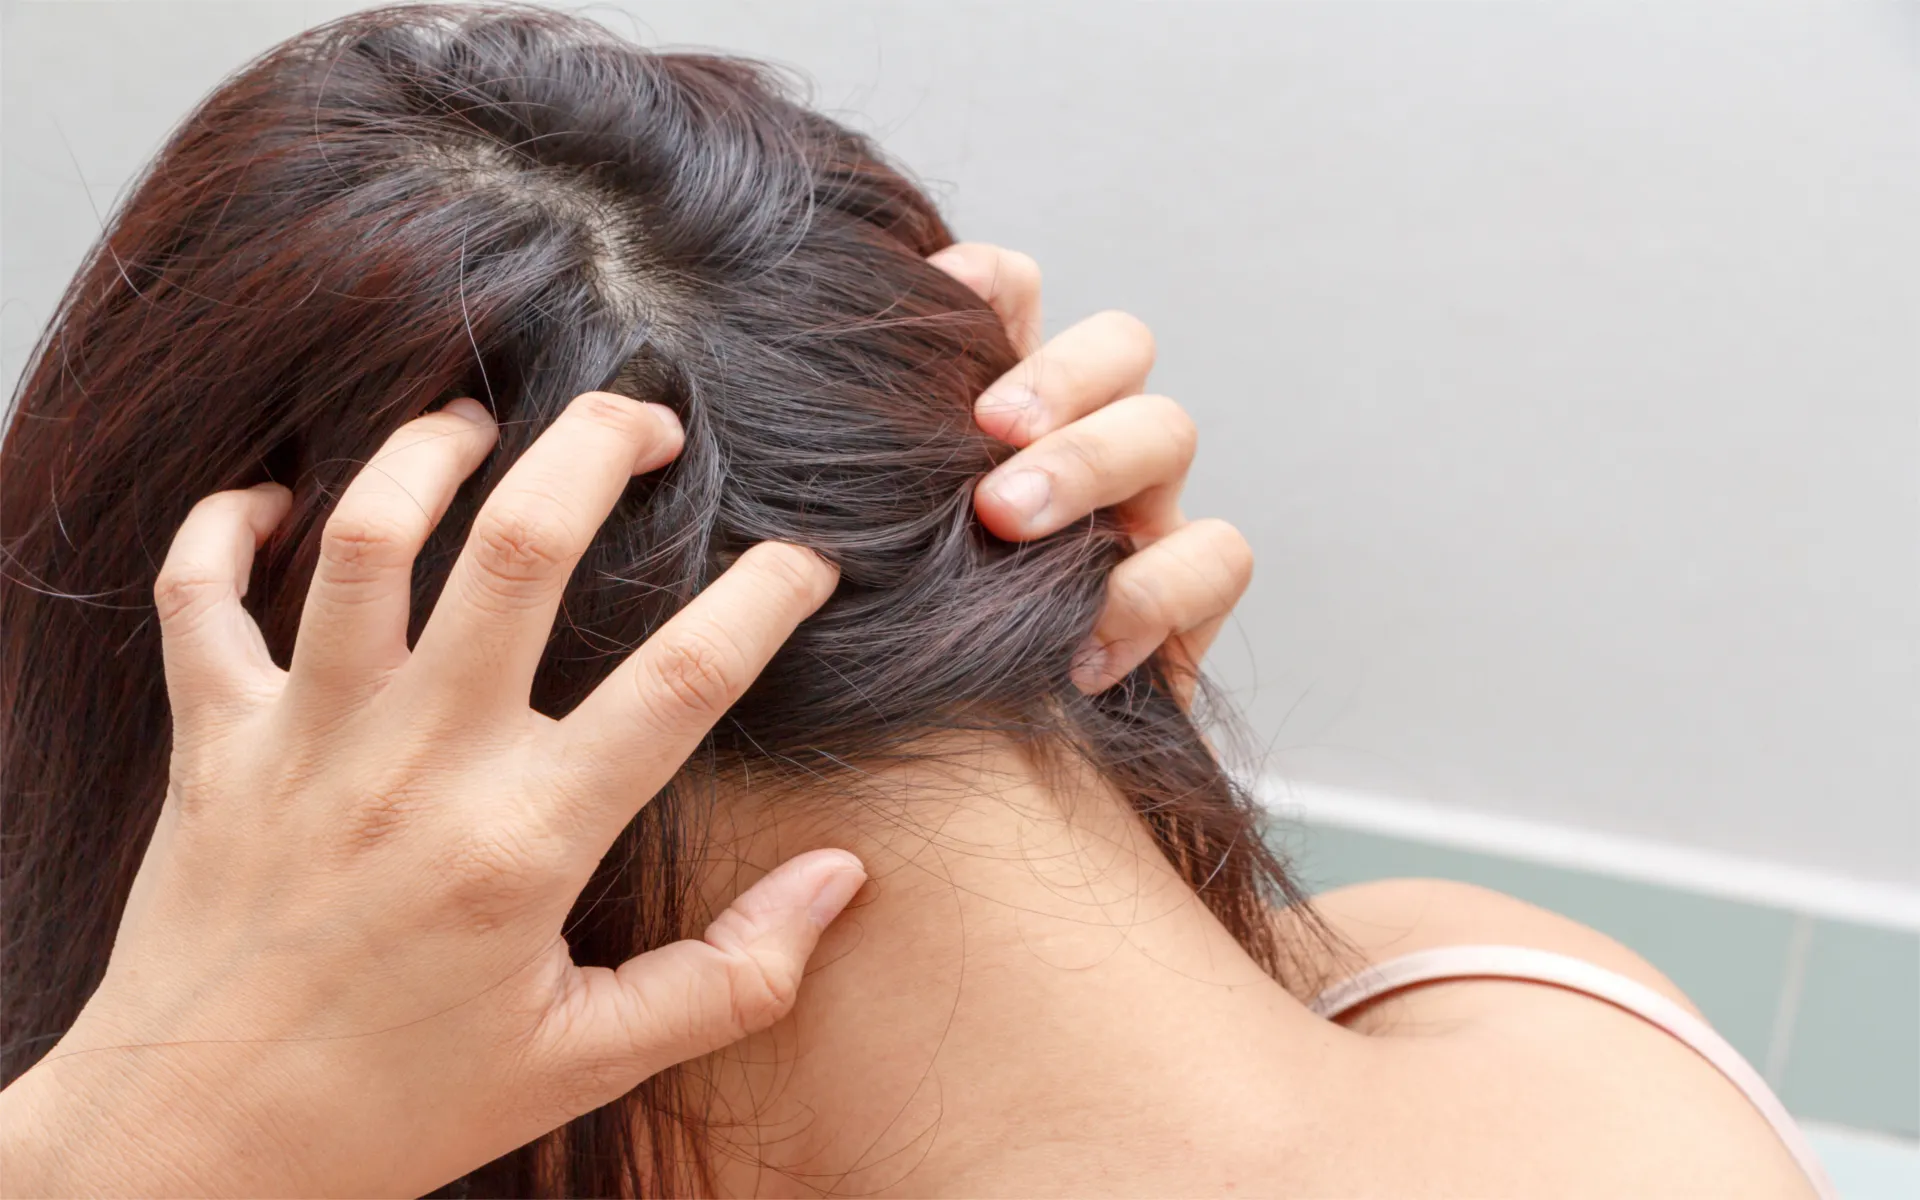 DIY Remedies for Dry/Itchy Scalp